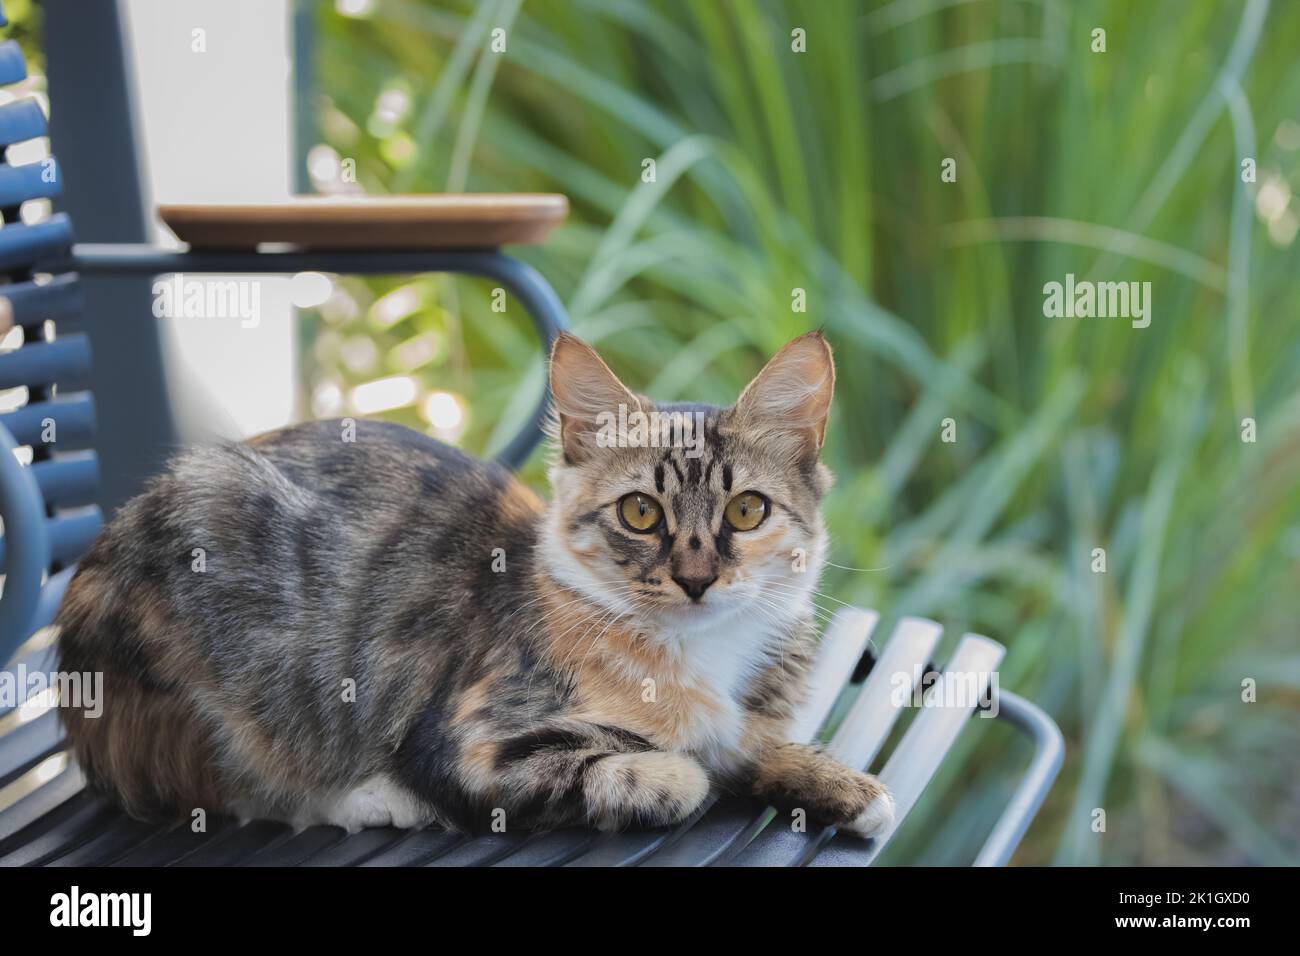 Close-up portrait of a tabby cat  on high alert sitting on a chair in the Greek Island village of Oia, Santorini, Greece. Stock Photo